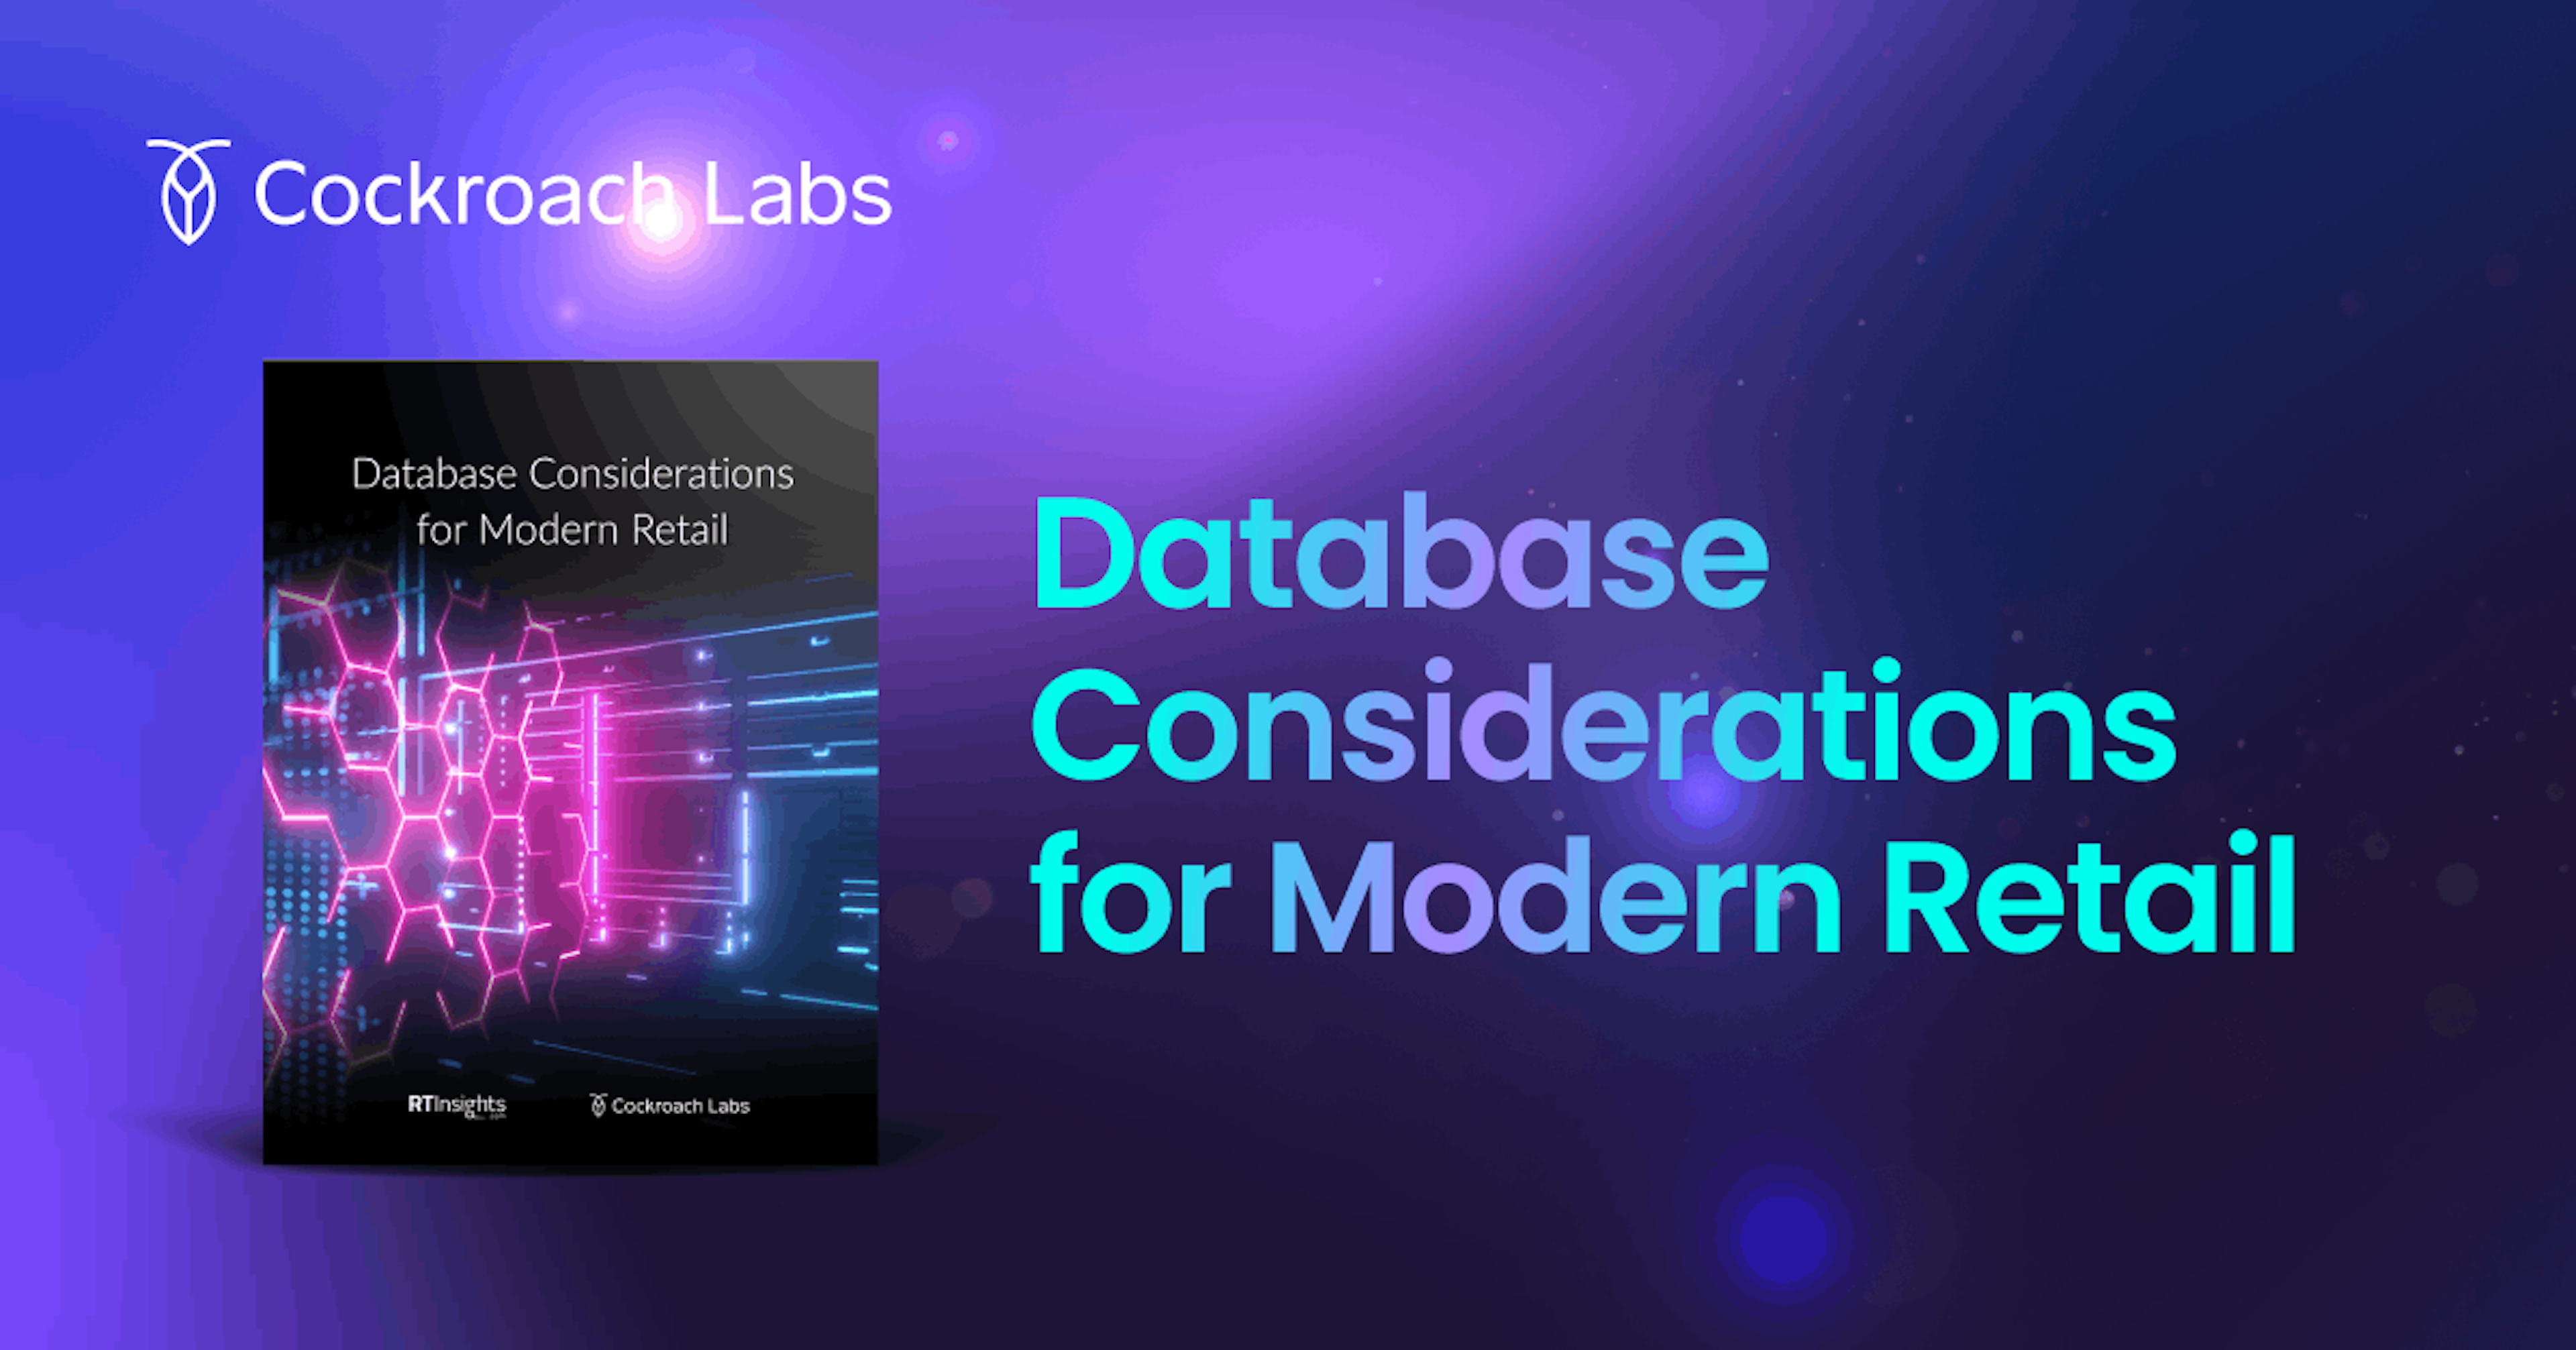 database-considerations-for-modern-retail-cockroachdb-og-image